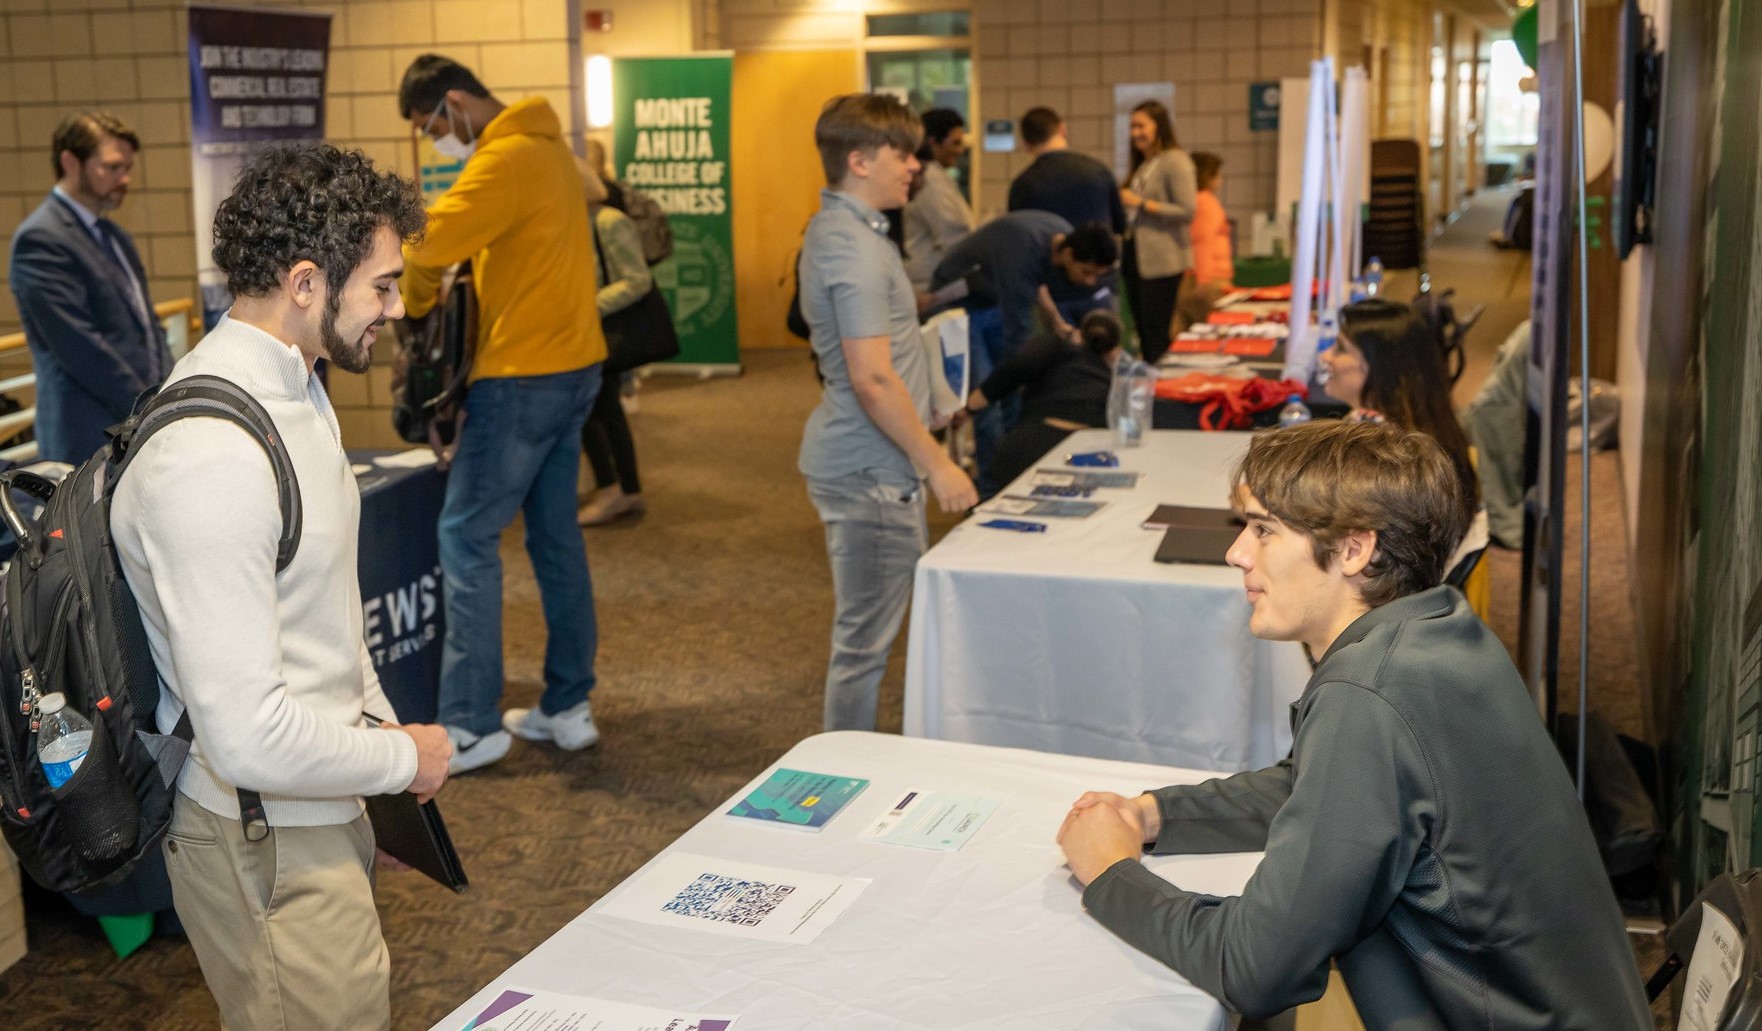 Inside the Ahuja College of Business Career & Internship Expo